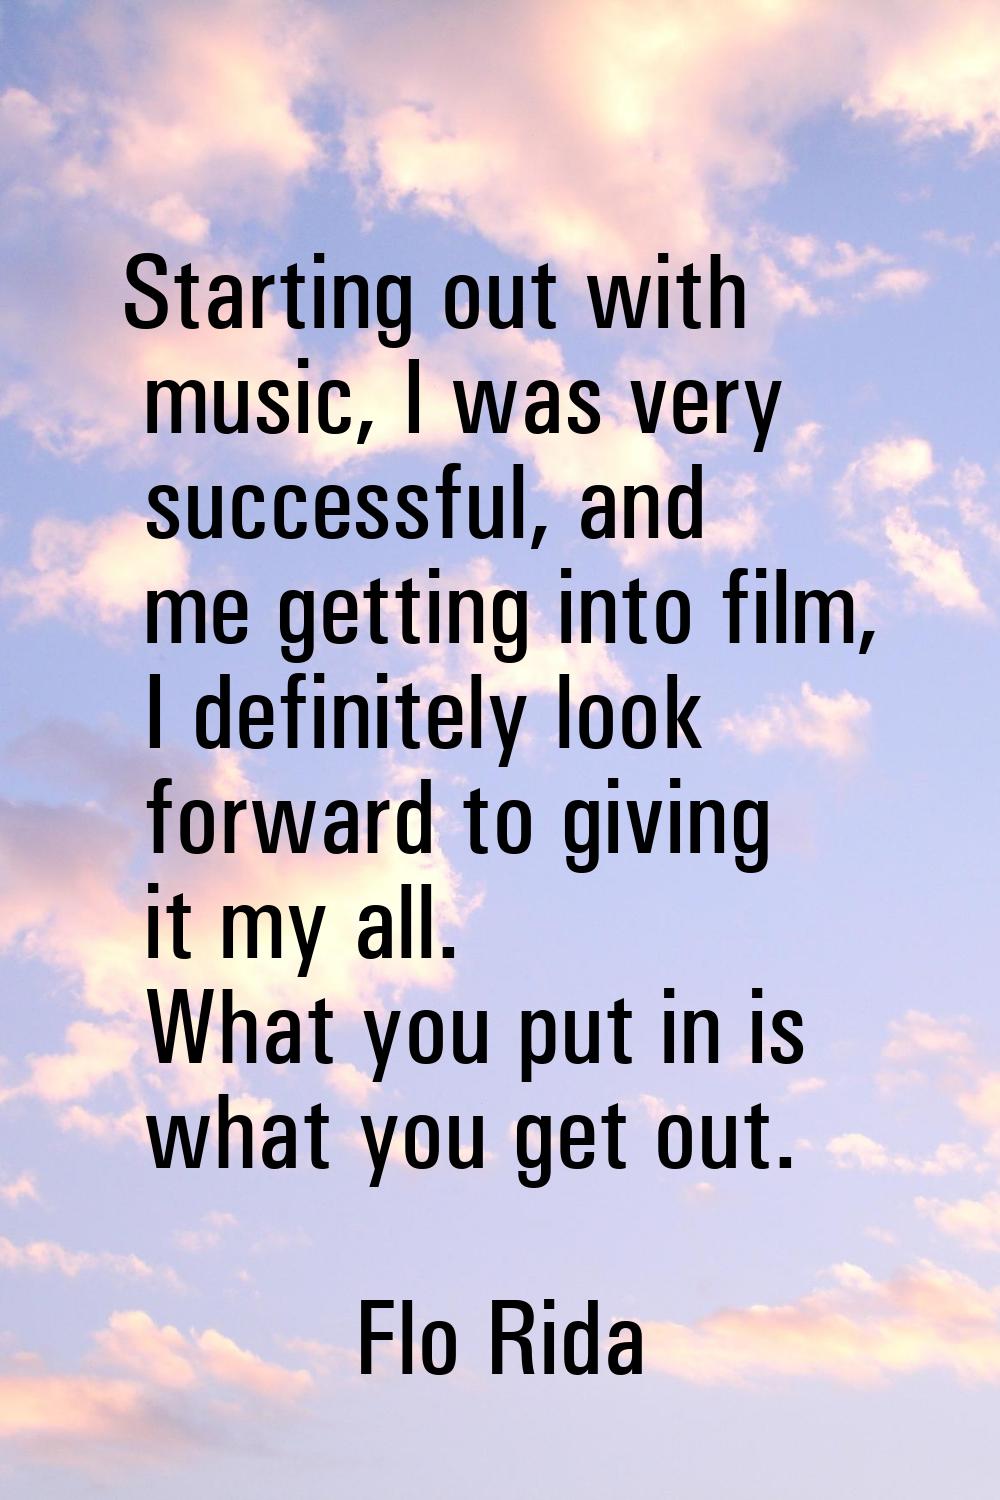 Starting out with music, I was very successful, and me getting into film, I definitely look forward